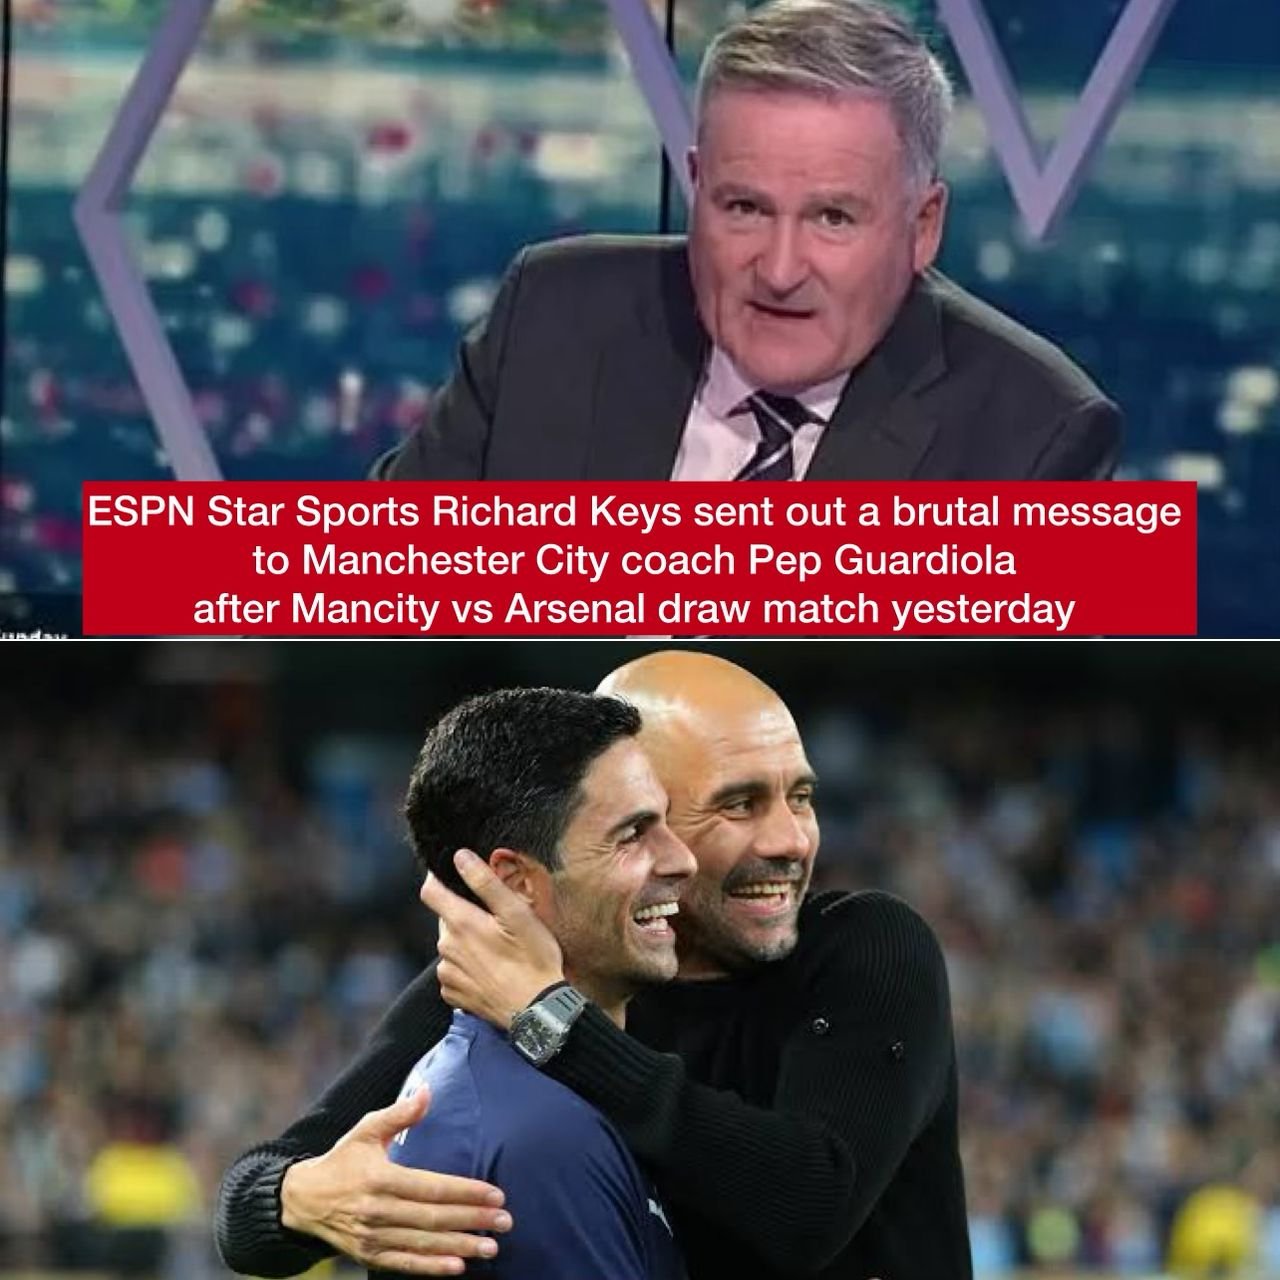 66 year-old Richard Keys fires out a serious message to Manchester City head coach Pep Guardiola after Mancity vs Arsenal draw match yesterday